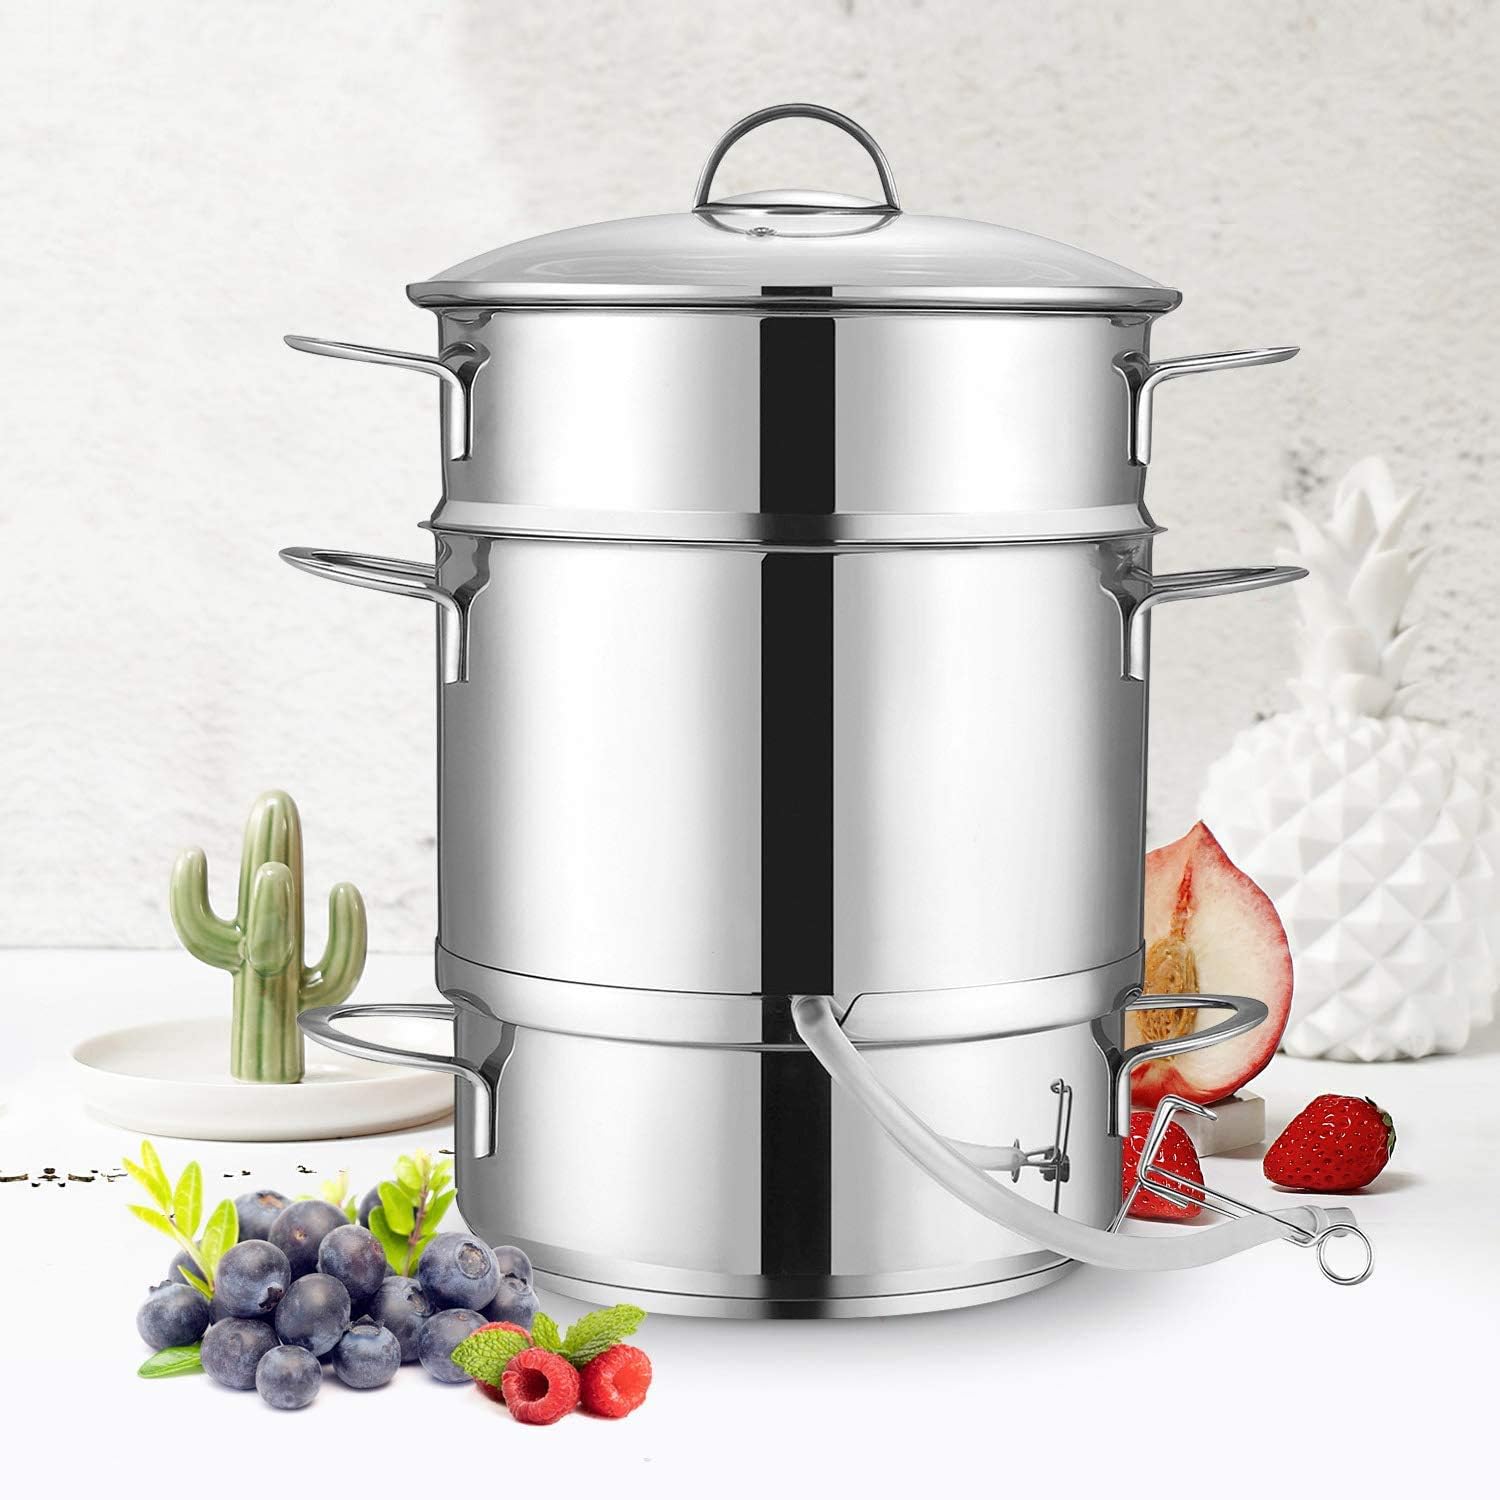 Euro Cuisine Stainless Steel Stove Top Steam Juicer